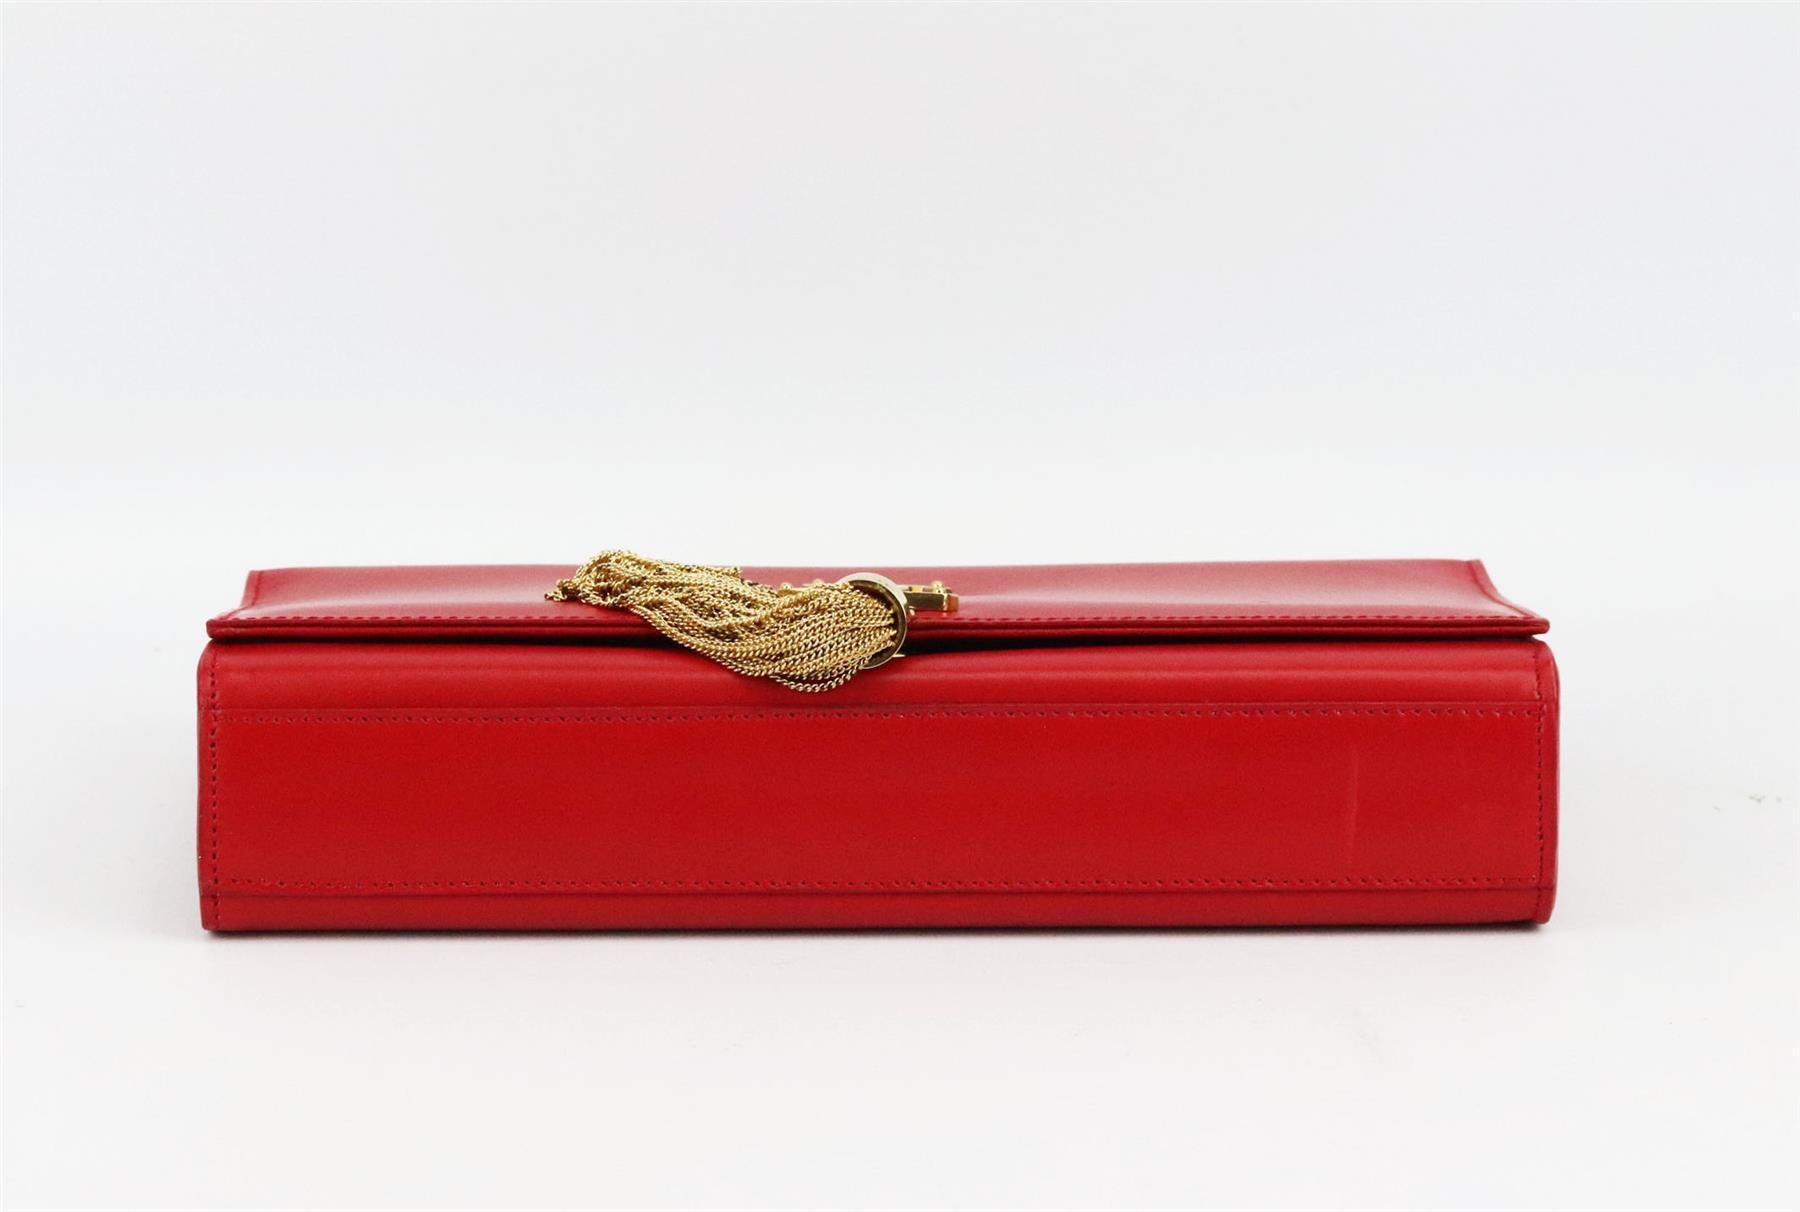 ysl red bag gold chain